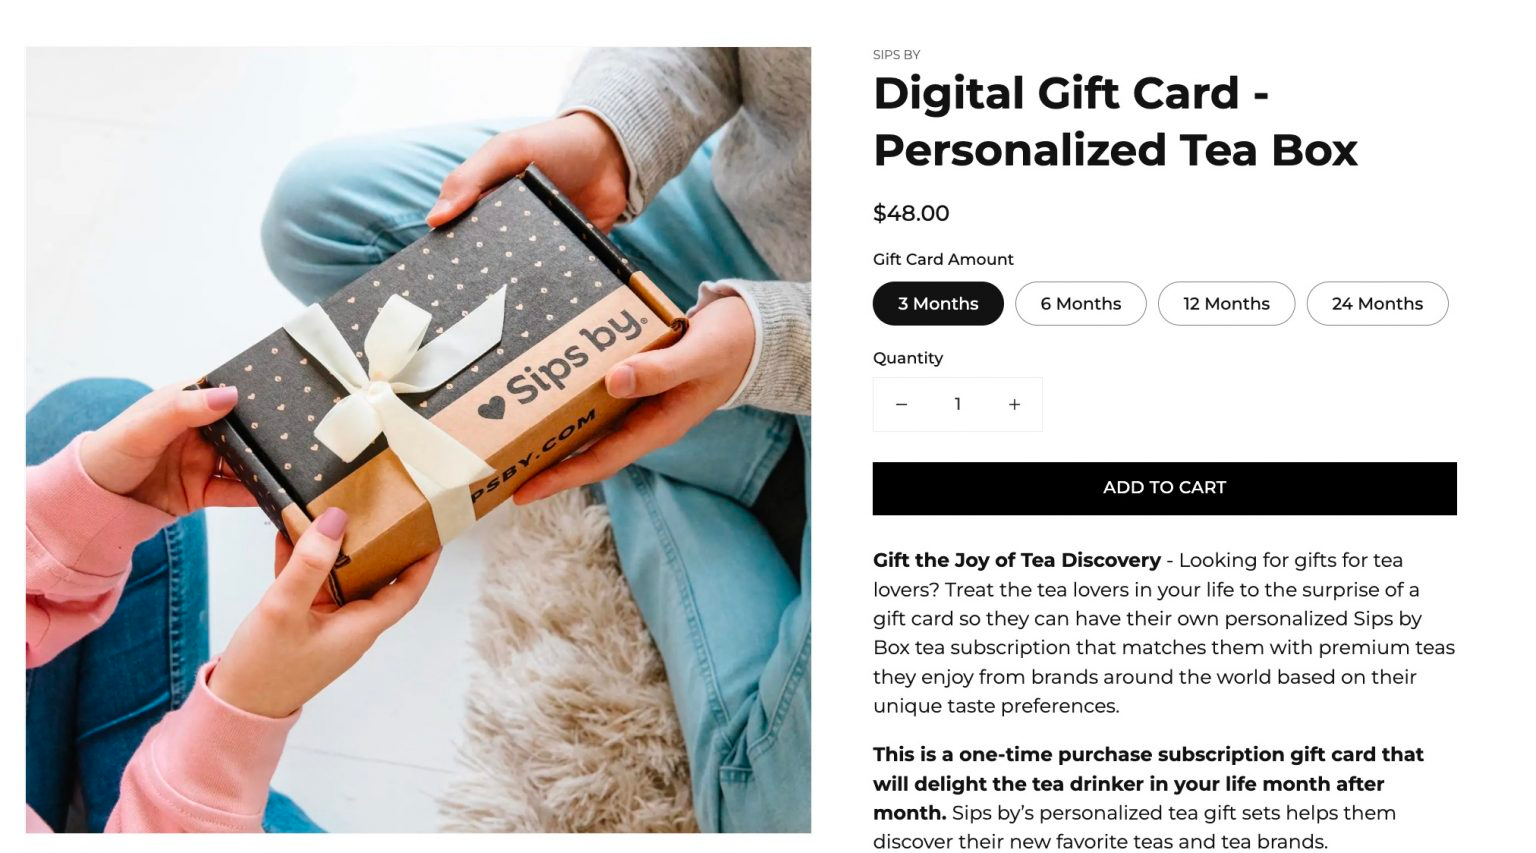 The Digital Gift Card for a personalized tea box by Sips By